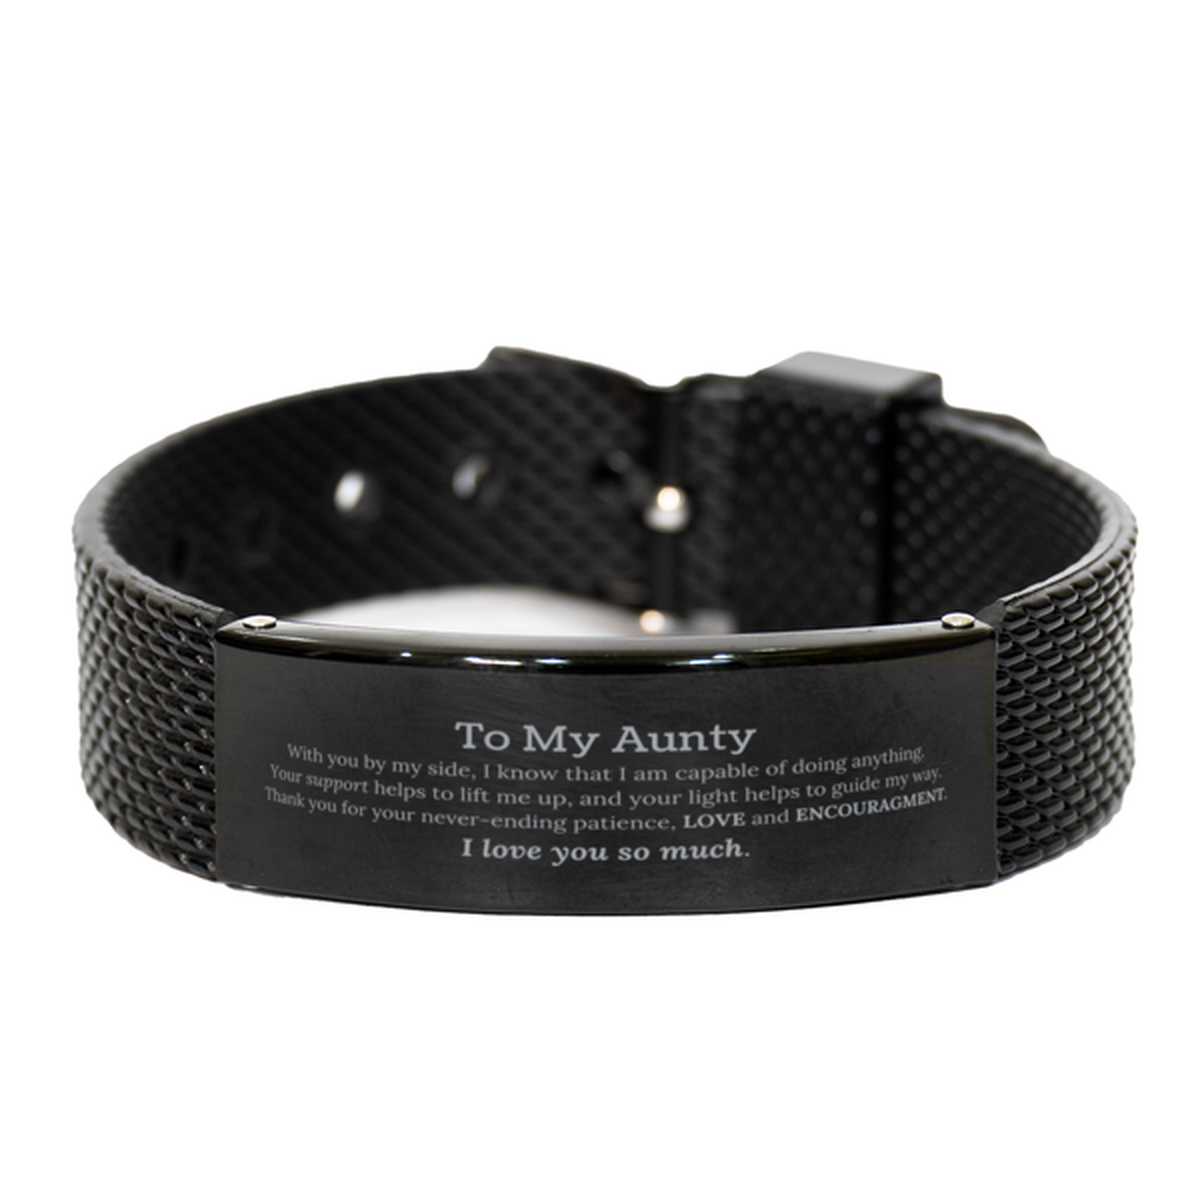 Appreciation Aunty Black Shark Mesh Bracelet Gifts, To My Aunty Birthday Christmas Wedding Keepsake Gifts for Aunty With you by my side, I know that I am capable of doing anything. I love you so much